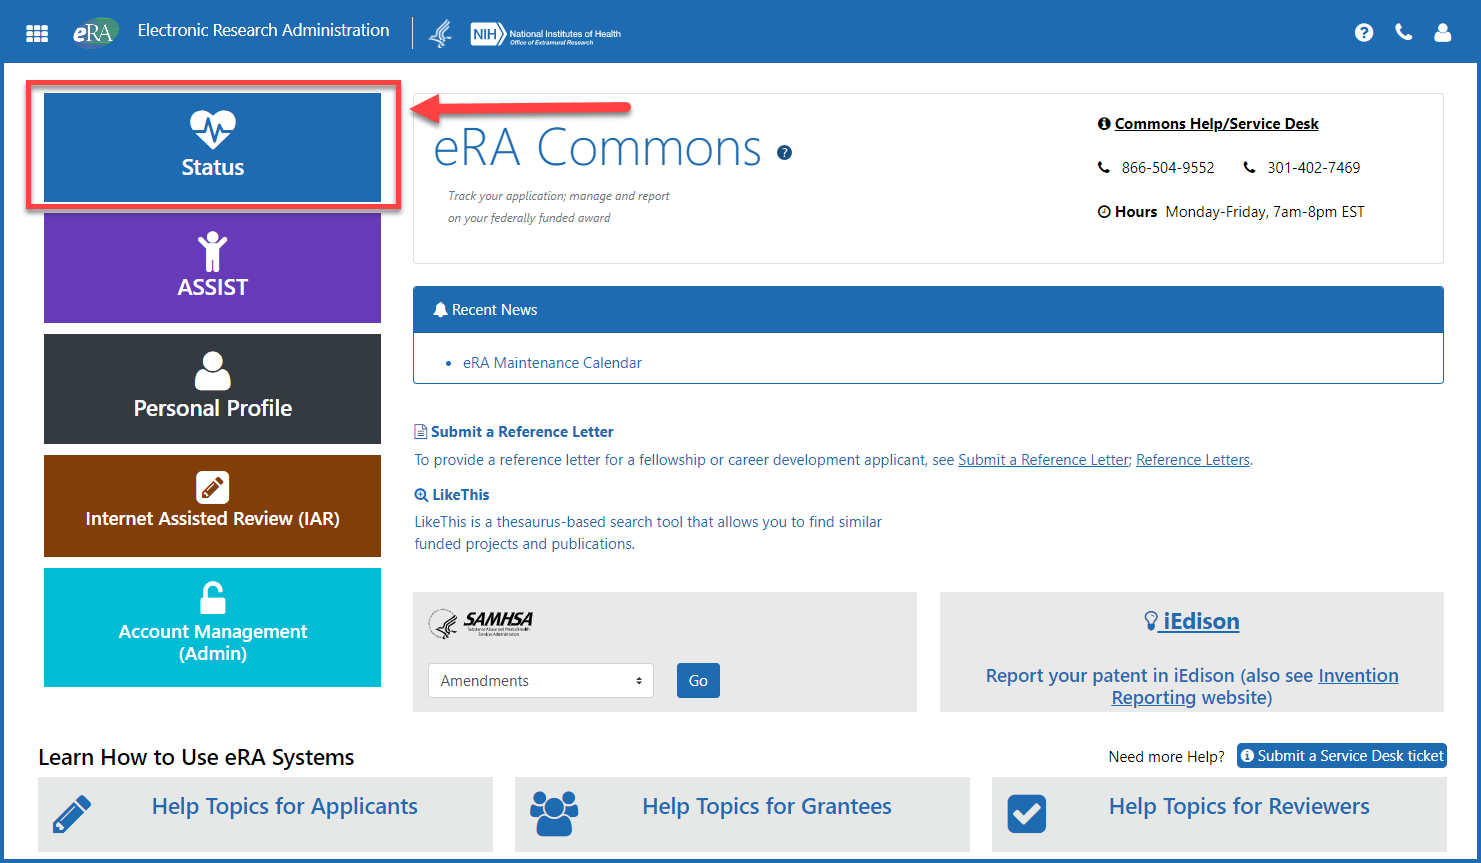 Figure 1: The Status button on the eRA Commons landing page